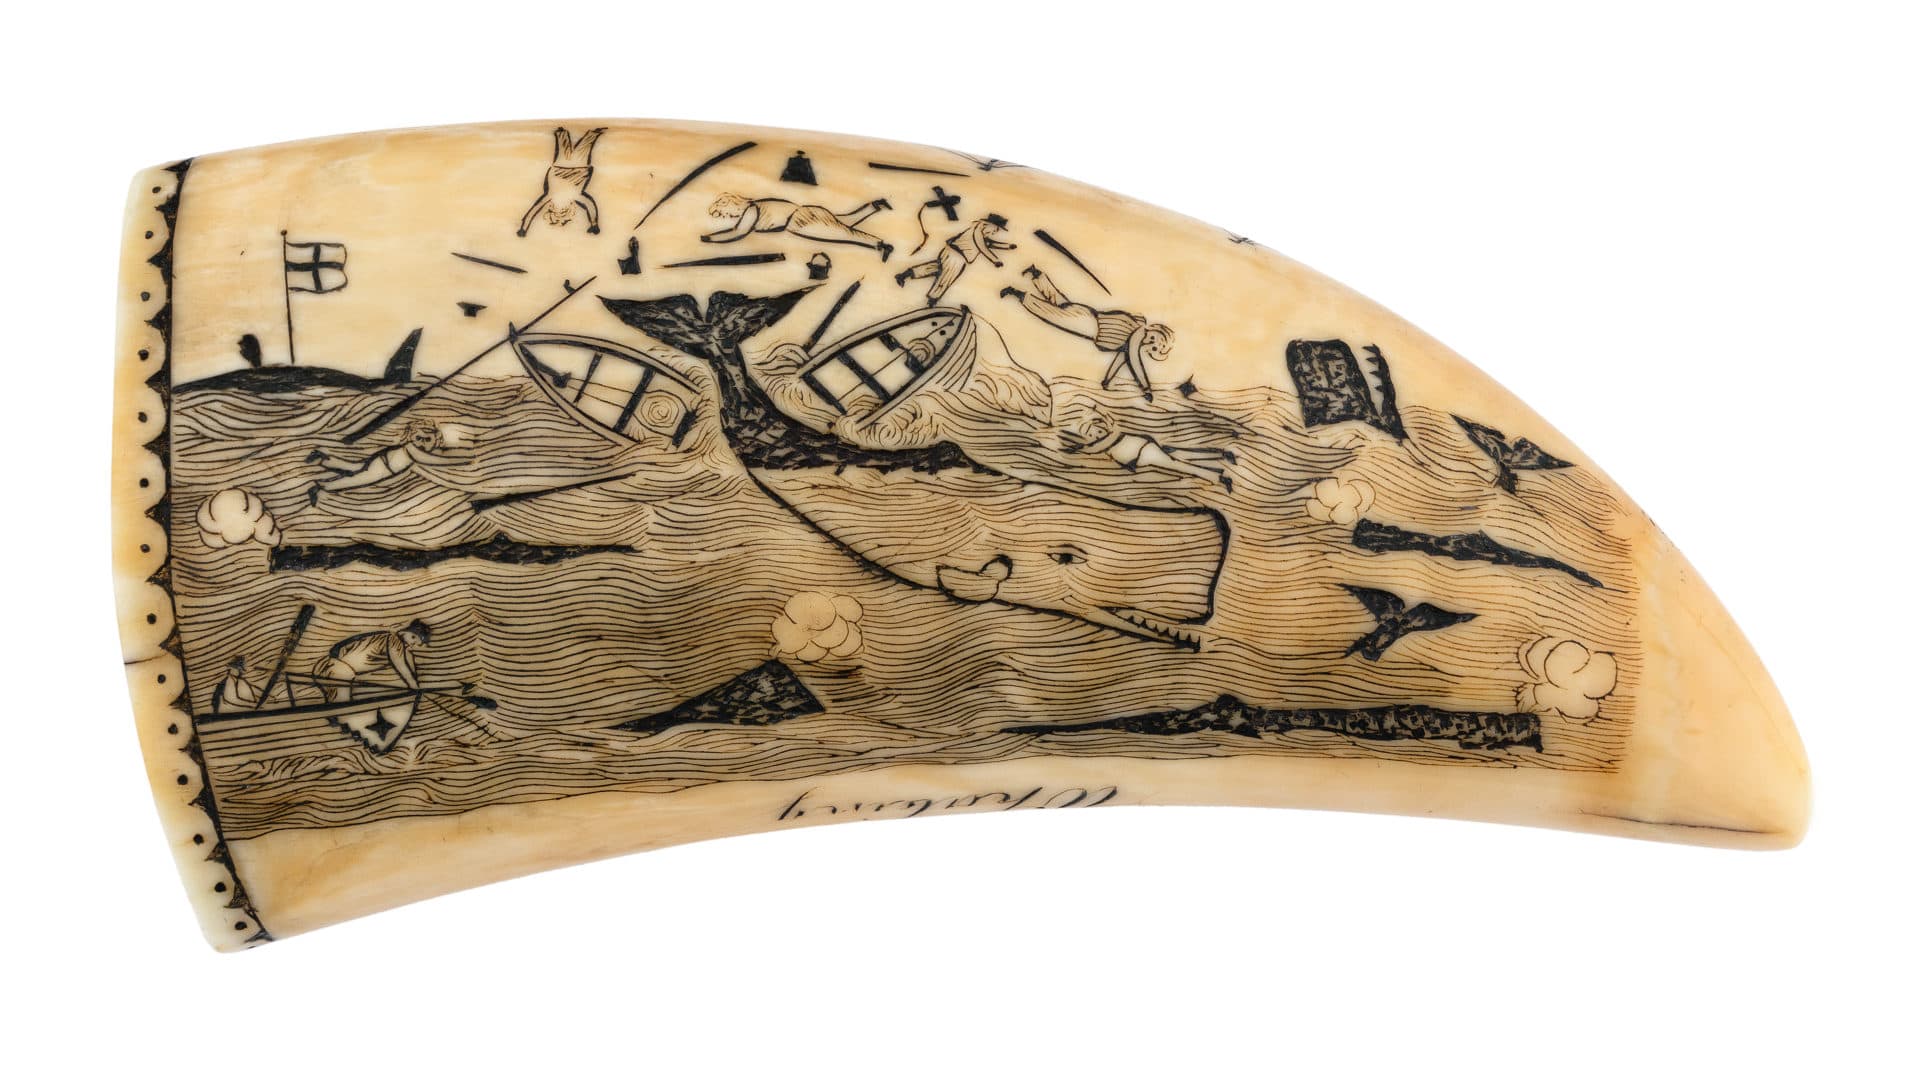 Britannia Engraver, &quot;The Ship Charles of London Whaling,&quot; c. 1850s, whale tooth, pigment, 5.25 inches. (Courtesy Cahoon Museum of American Art)